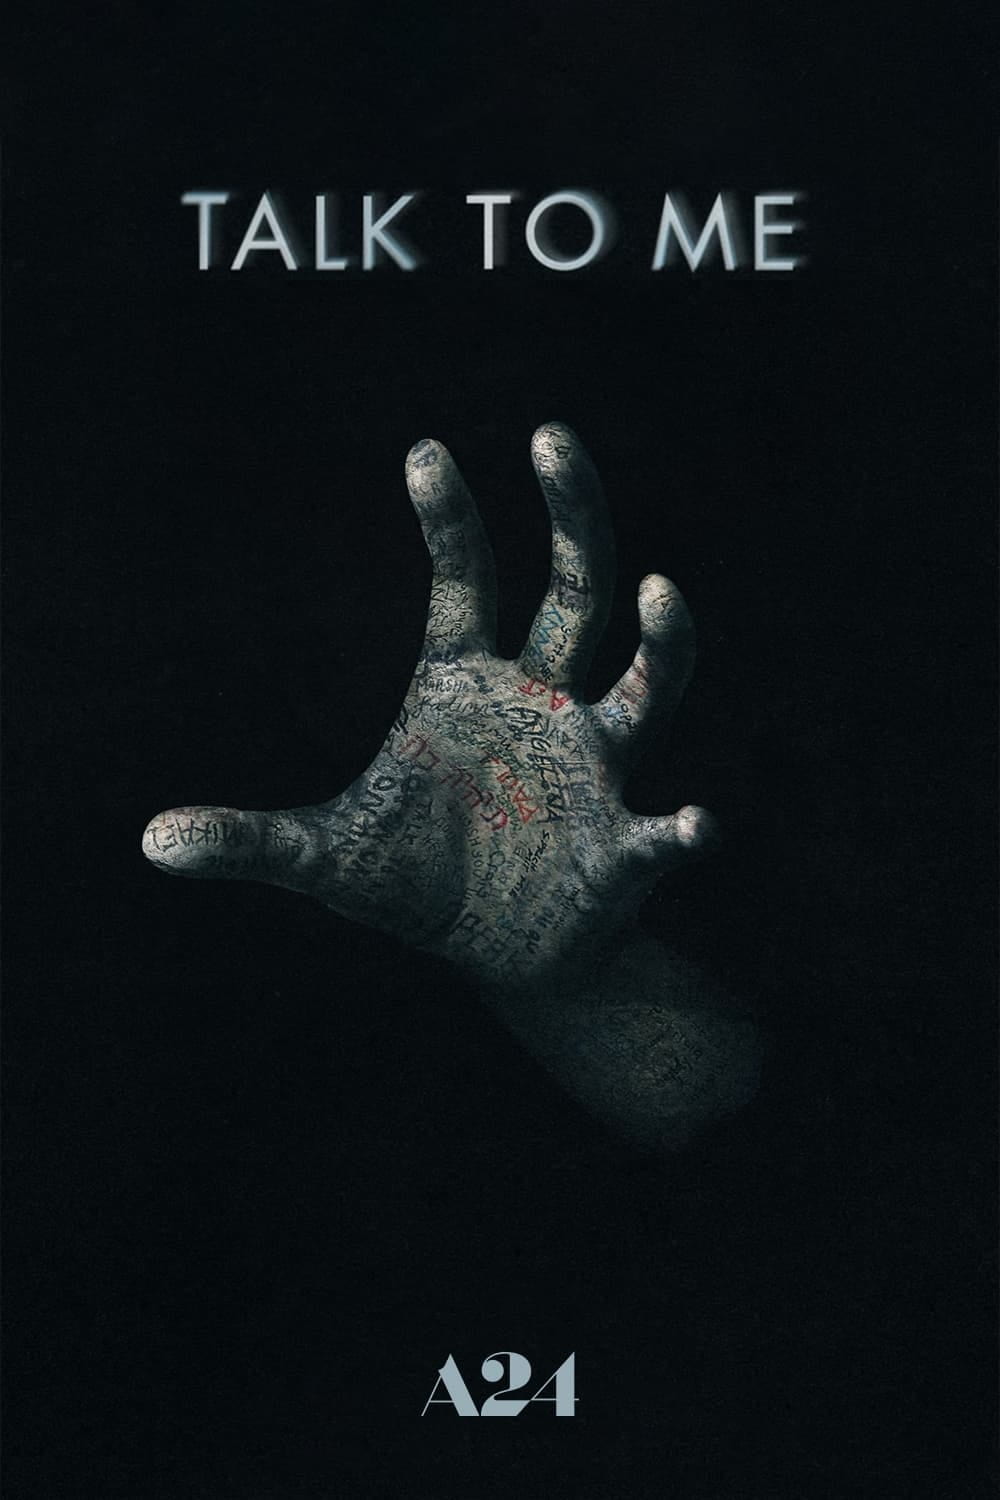 Poster for Talk to Me